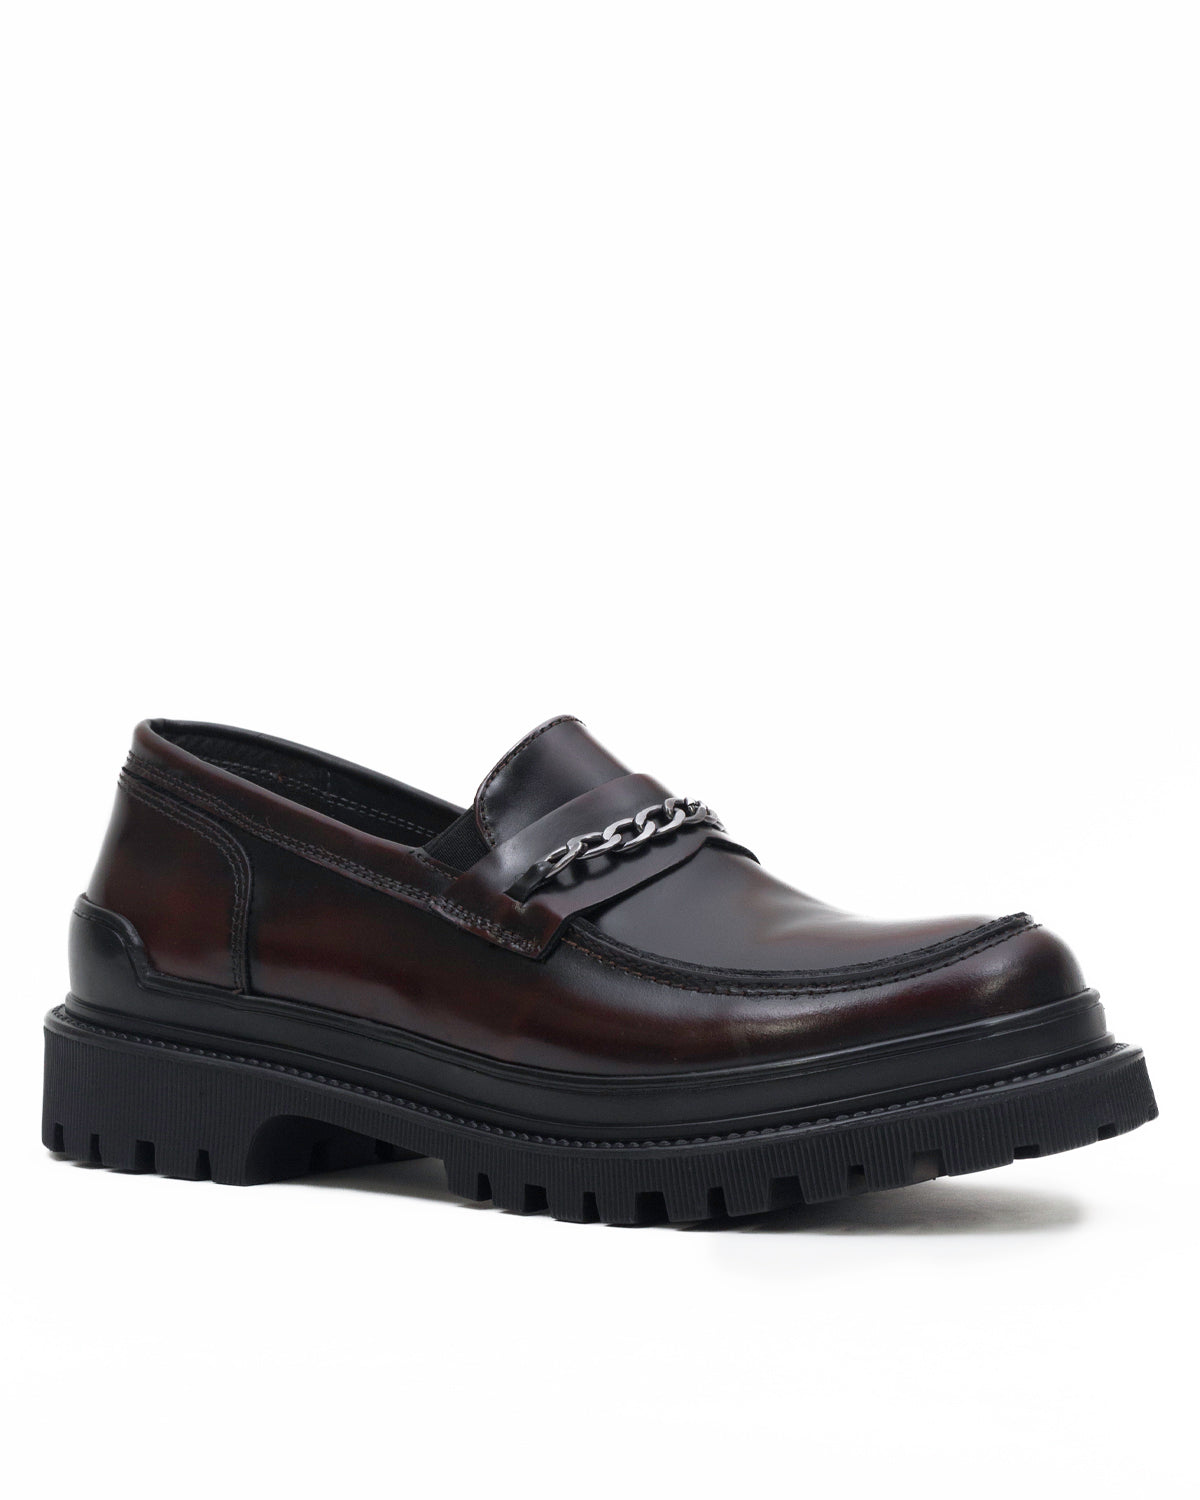 MISAEL WINE LOAFERS